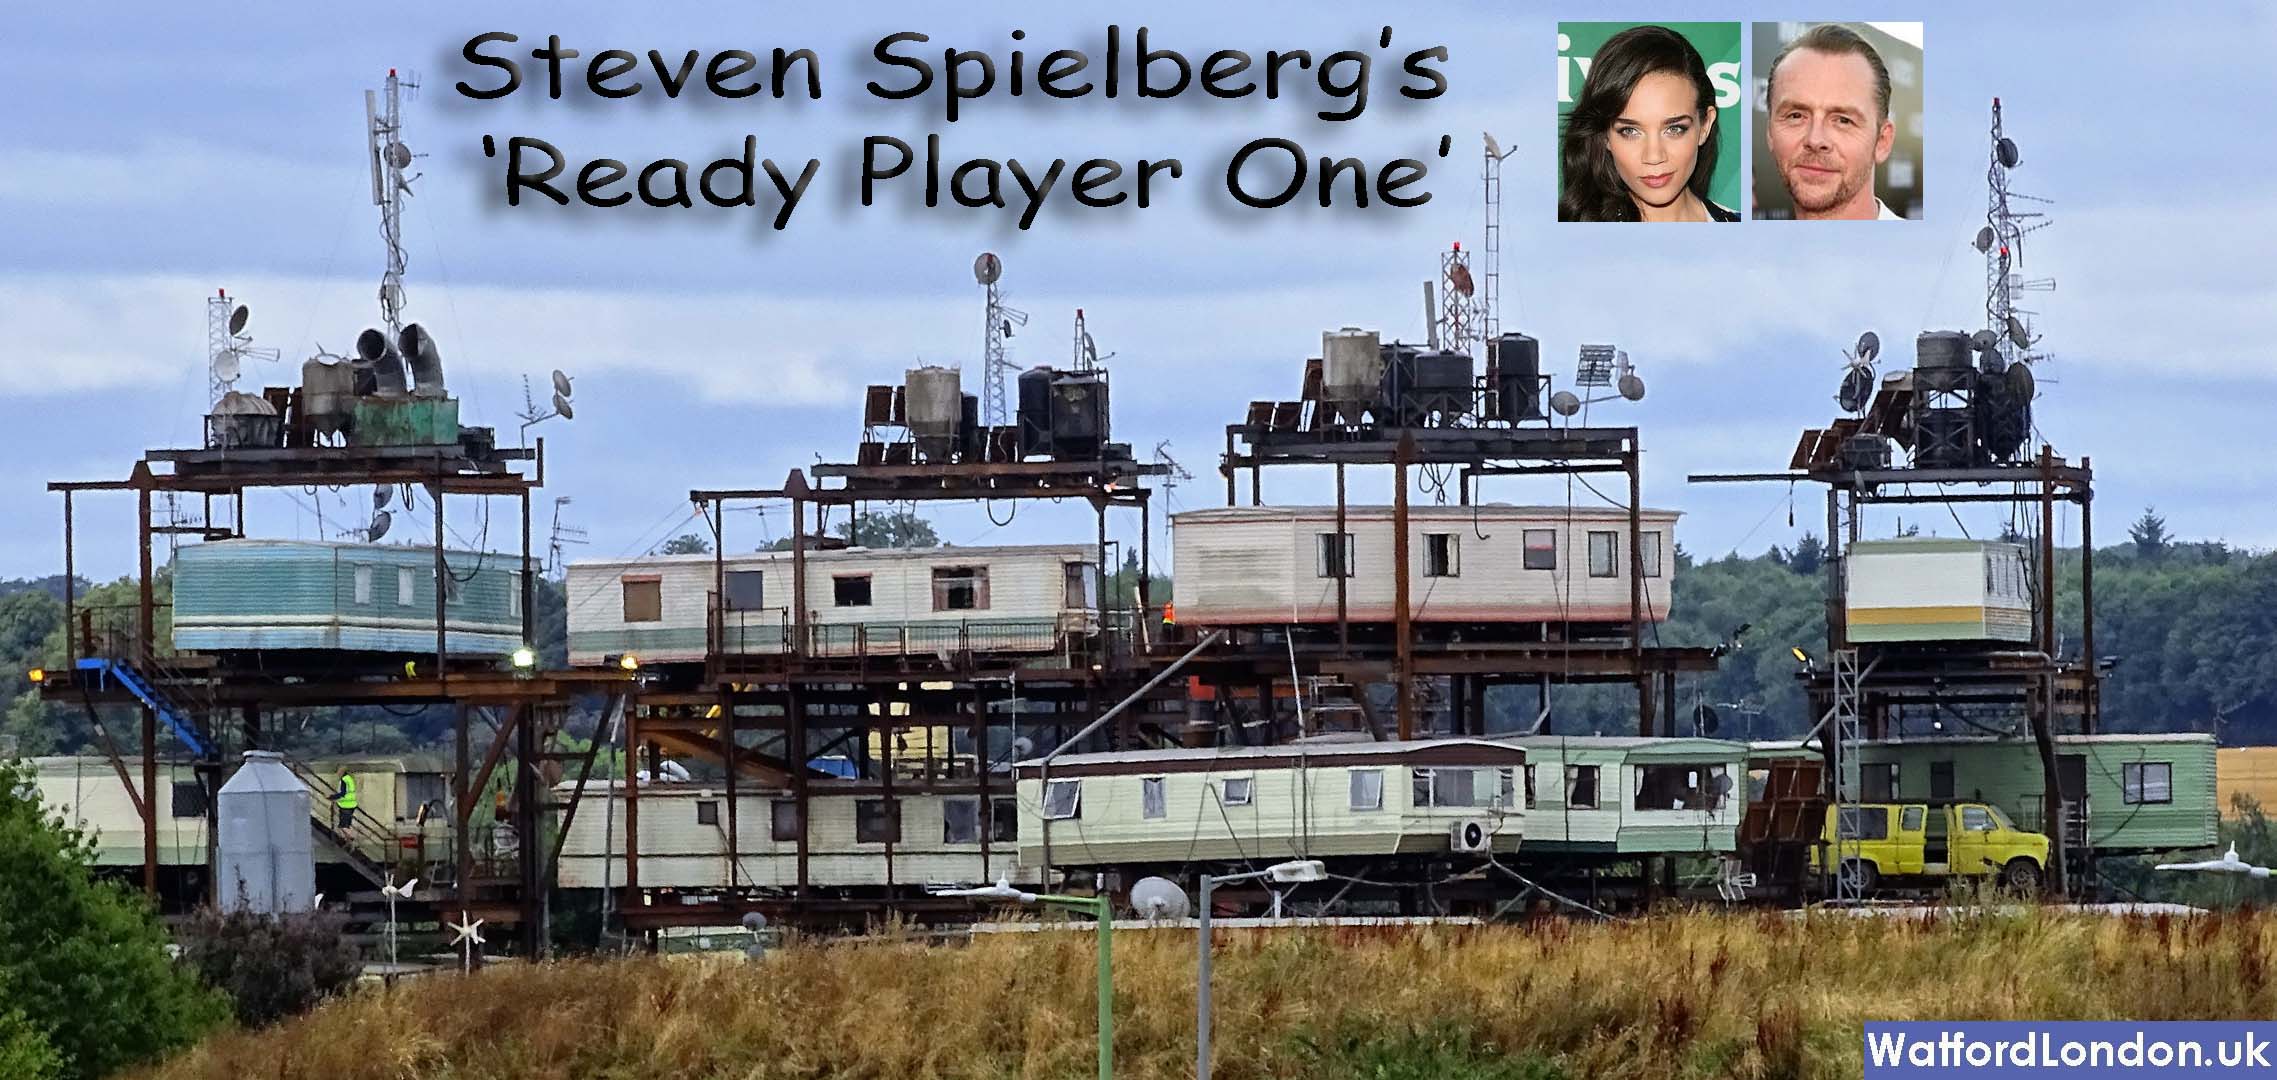 The New Steven Spielberg’s ‘Ready Player One’ Film Set has begun production in Watford.